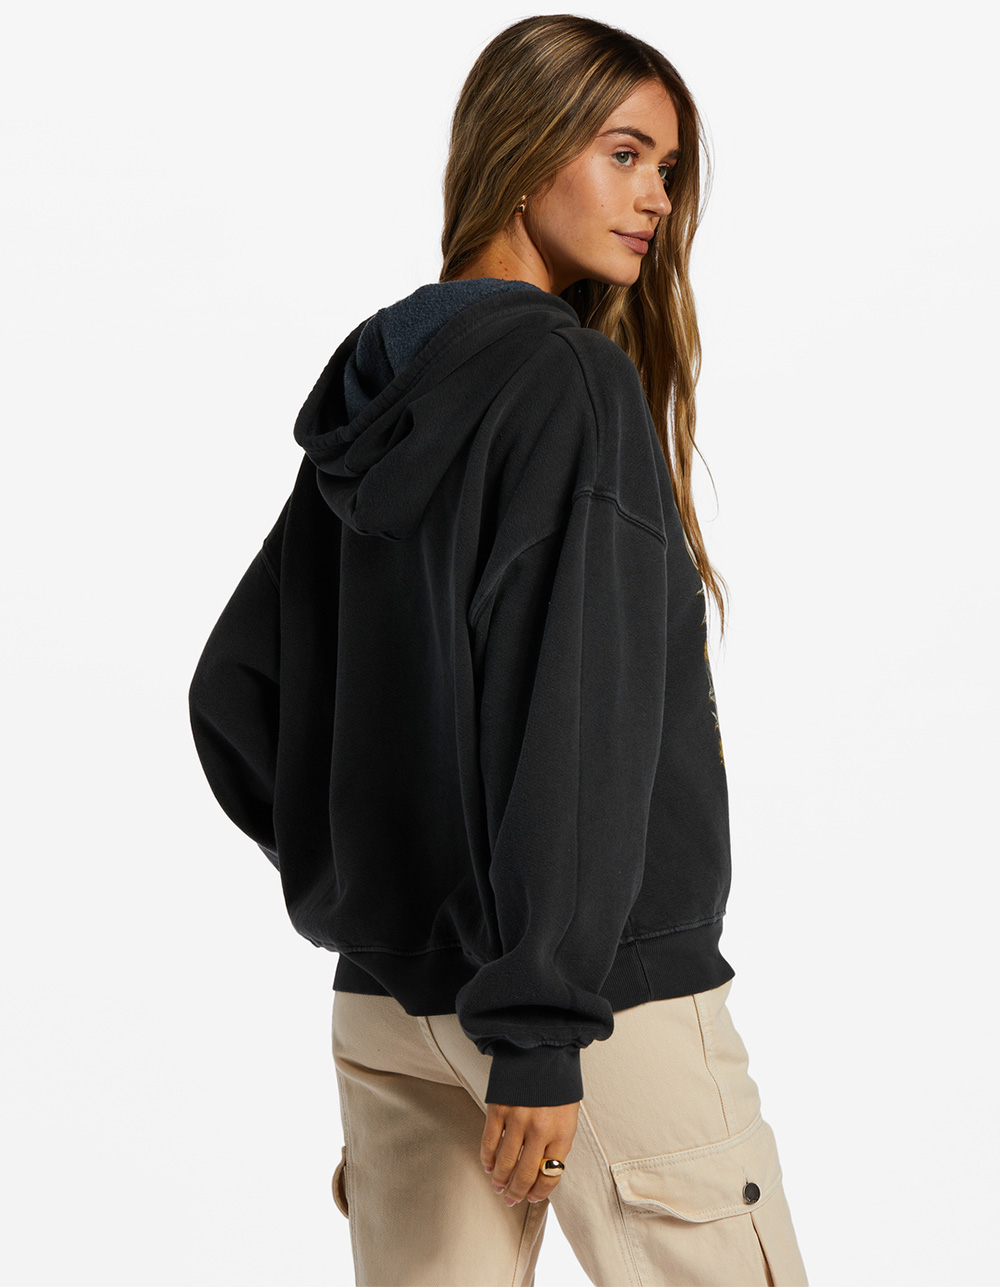 Keep Ridin - Oversized Hoodie for Women